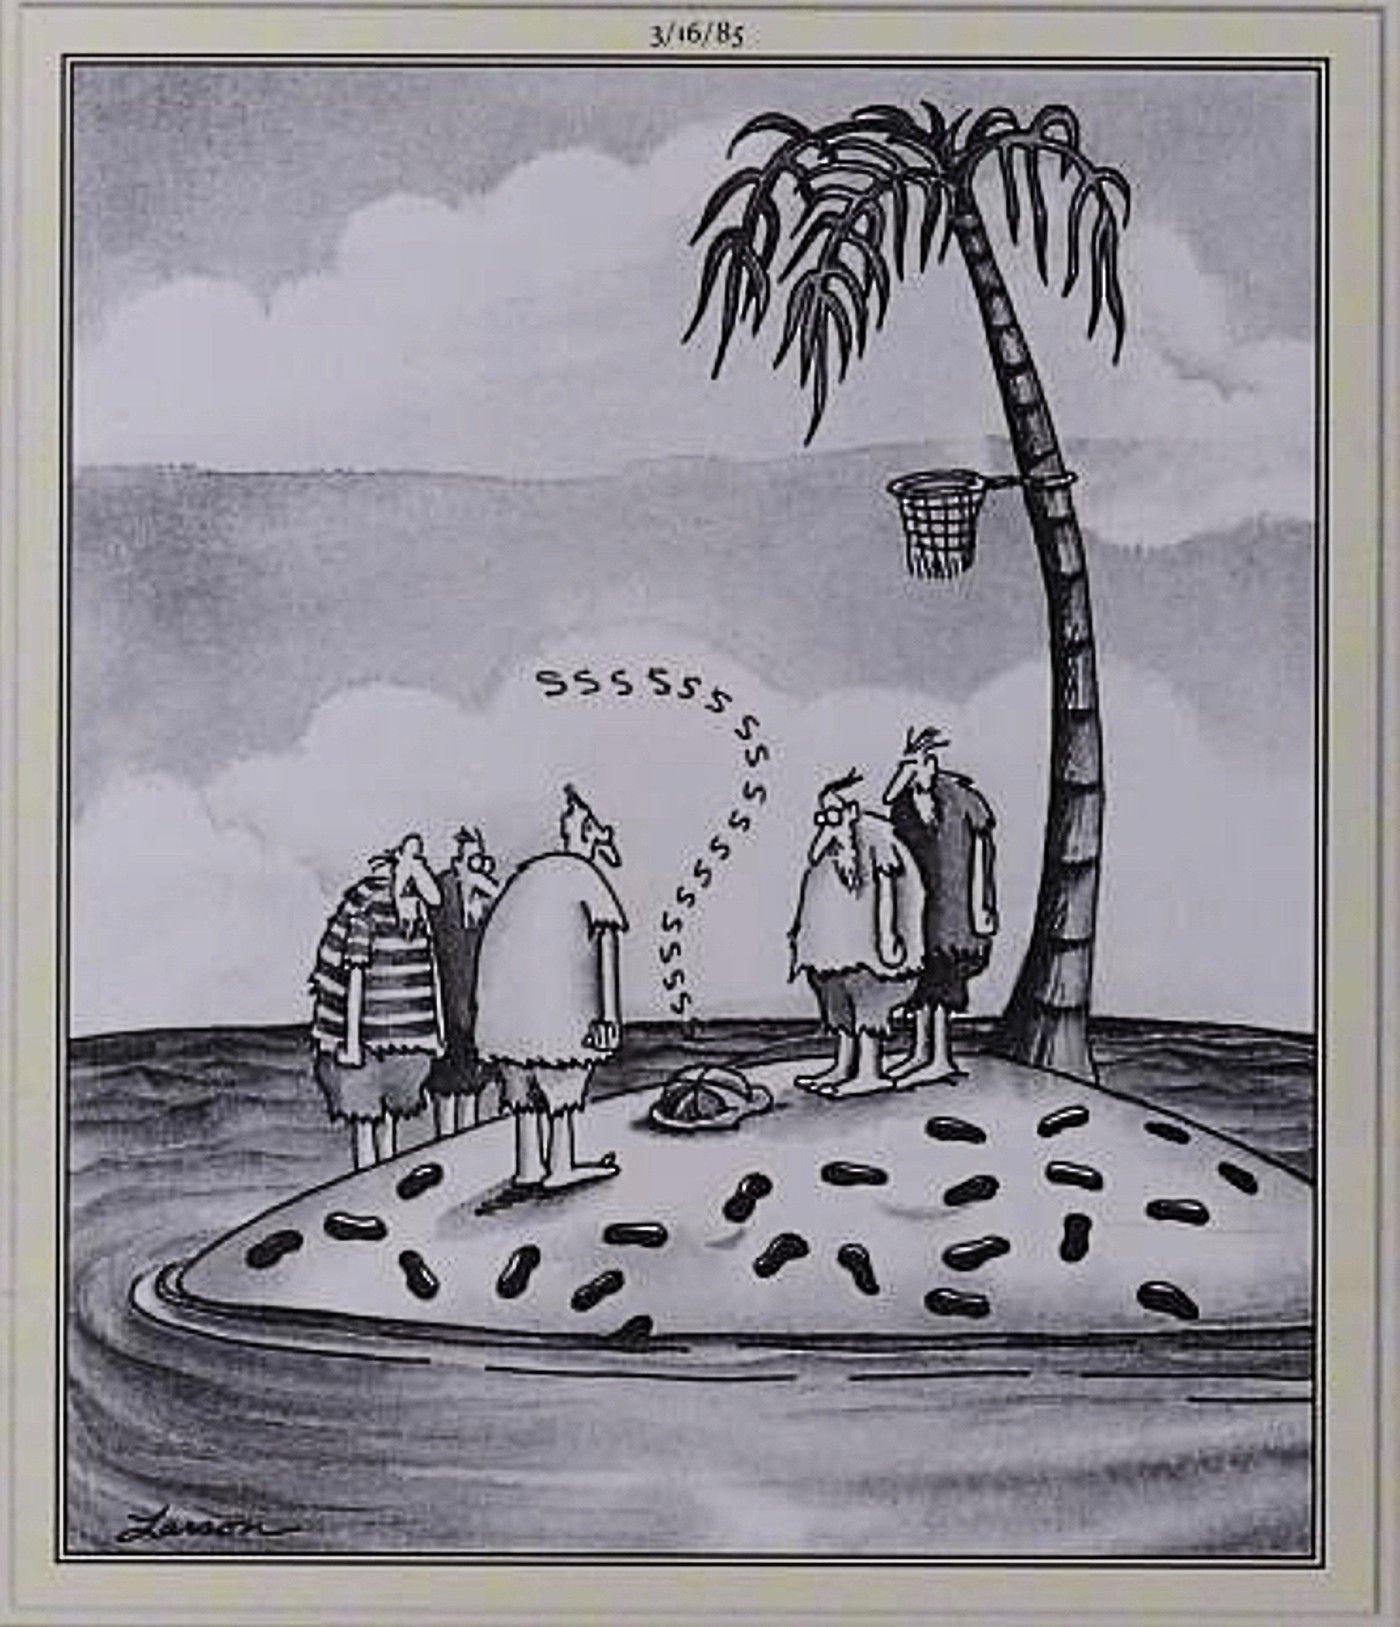 Far Side, men playing basketball on desert island let the air out of their ball